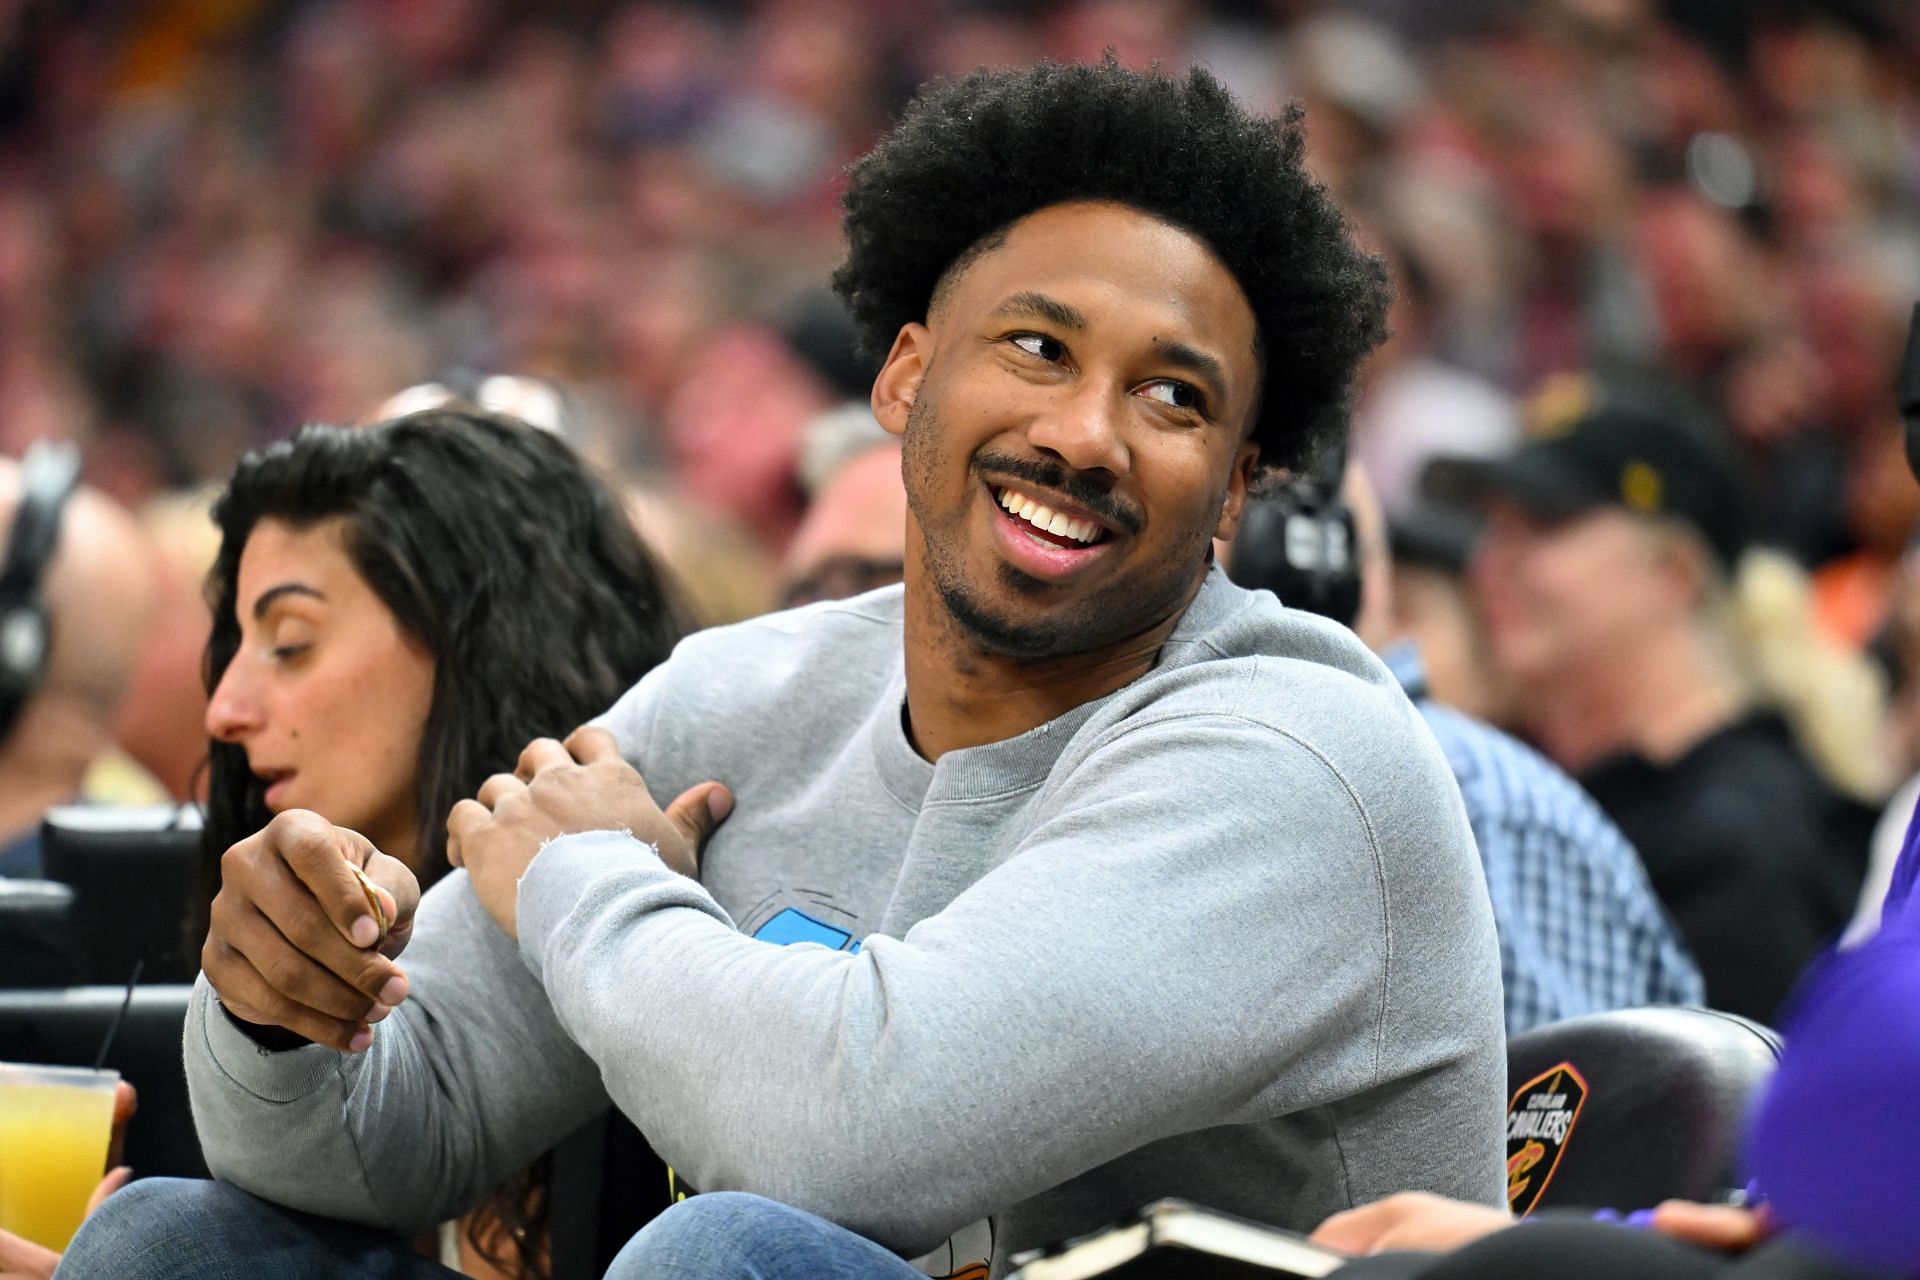 Myles Garrett would need a 20+ sack season to secure end of year honours